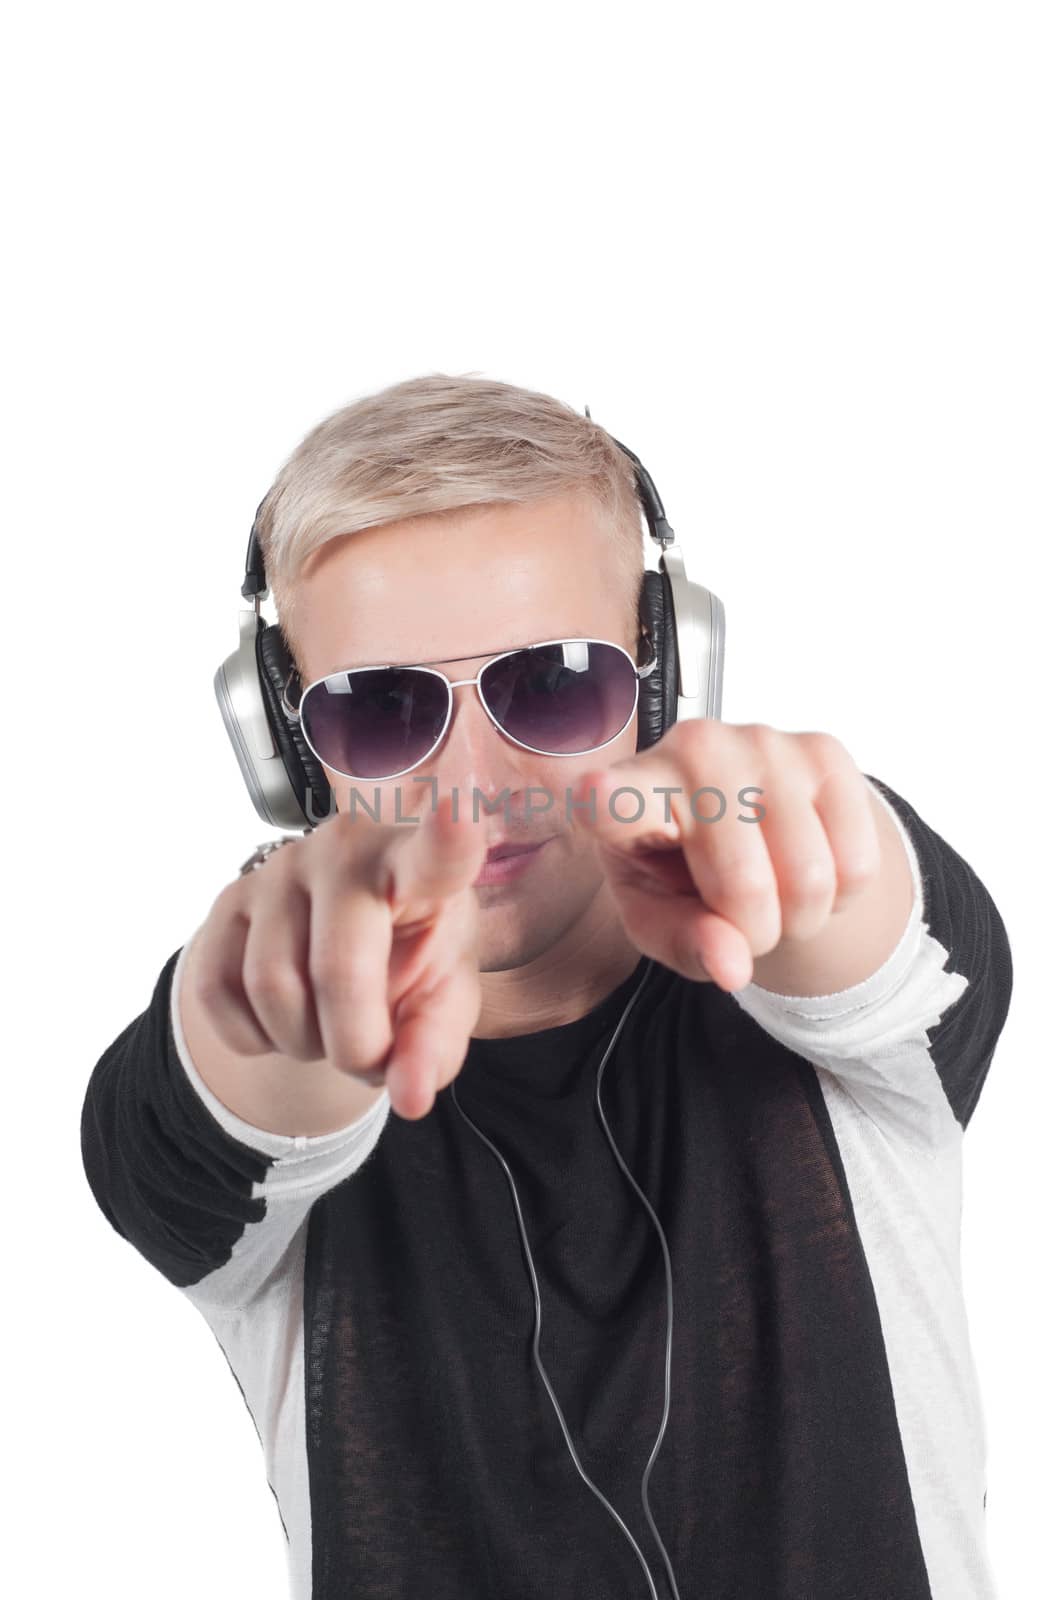 Man with headphones and sunglasses pointing his fingers